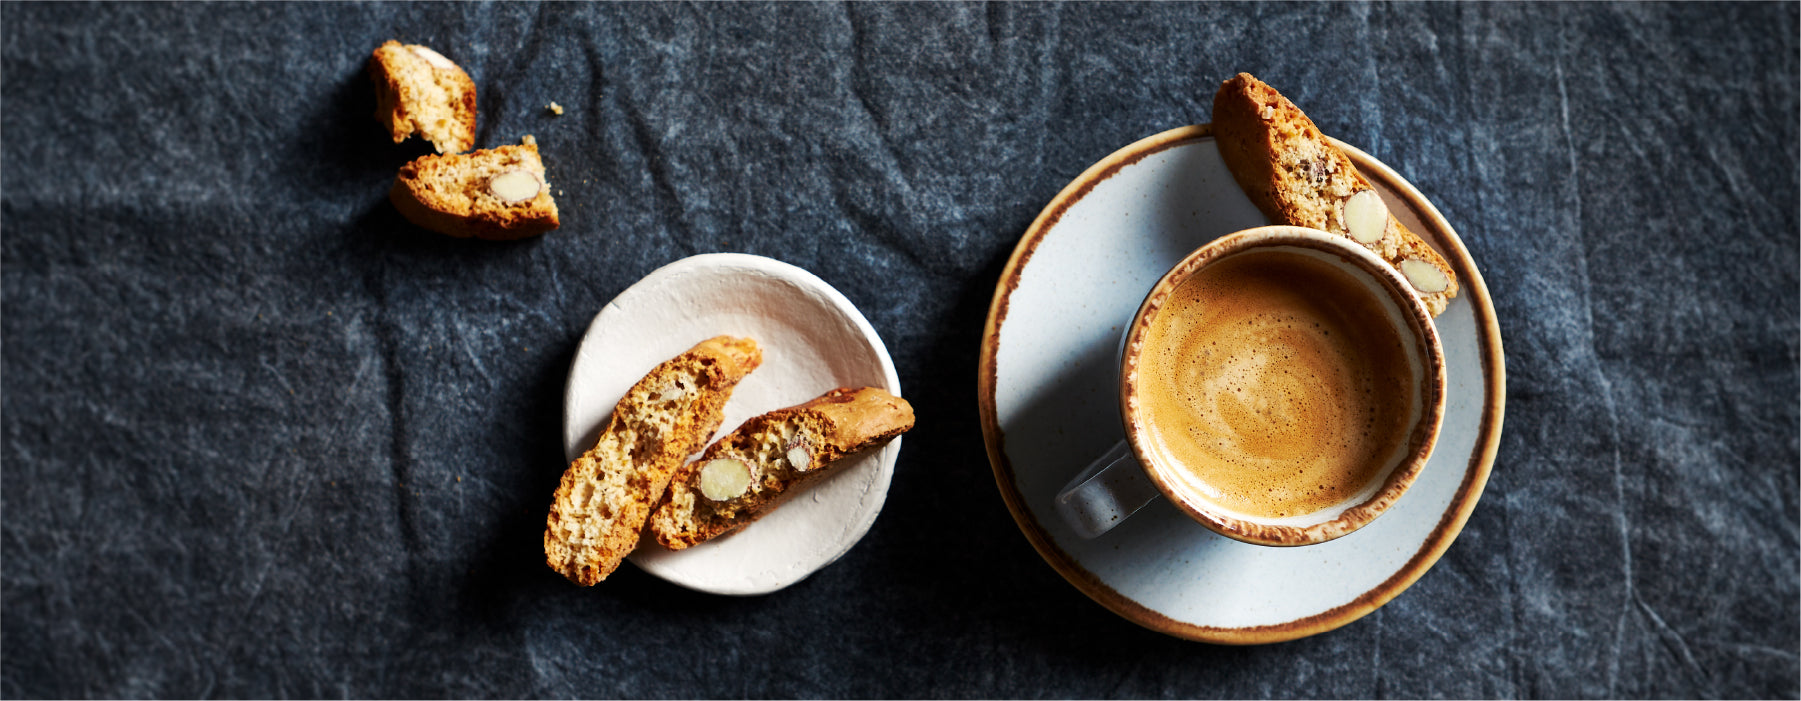 Coffee Hits Different with this Biscotti Recipe - EspressoWorks